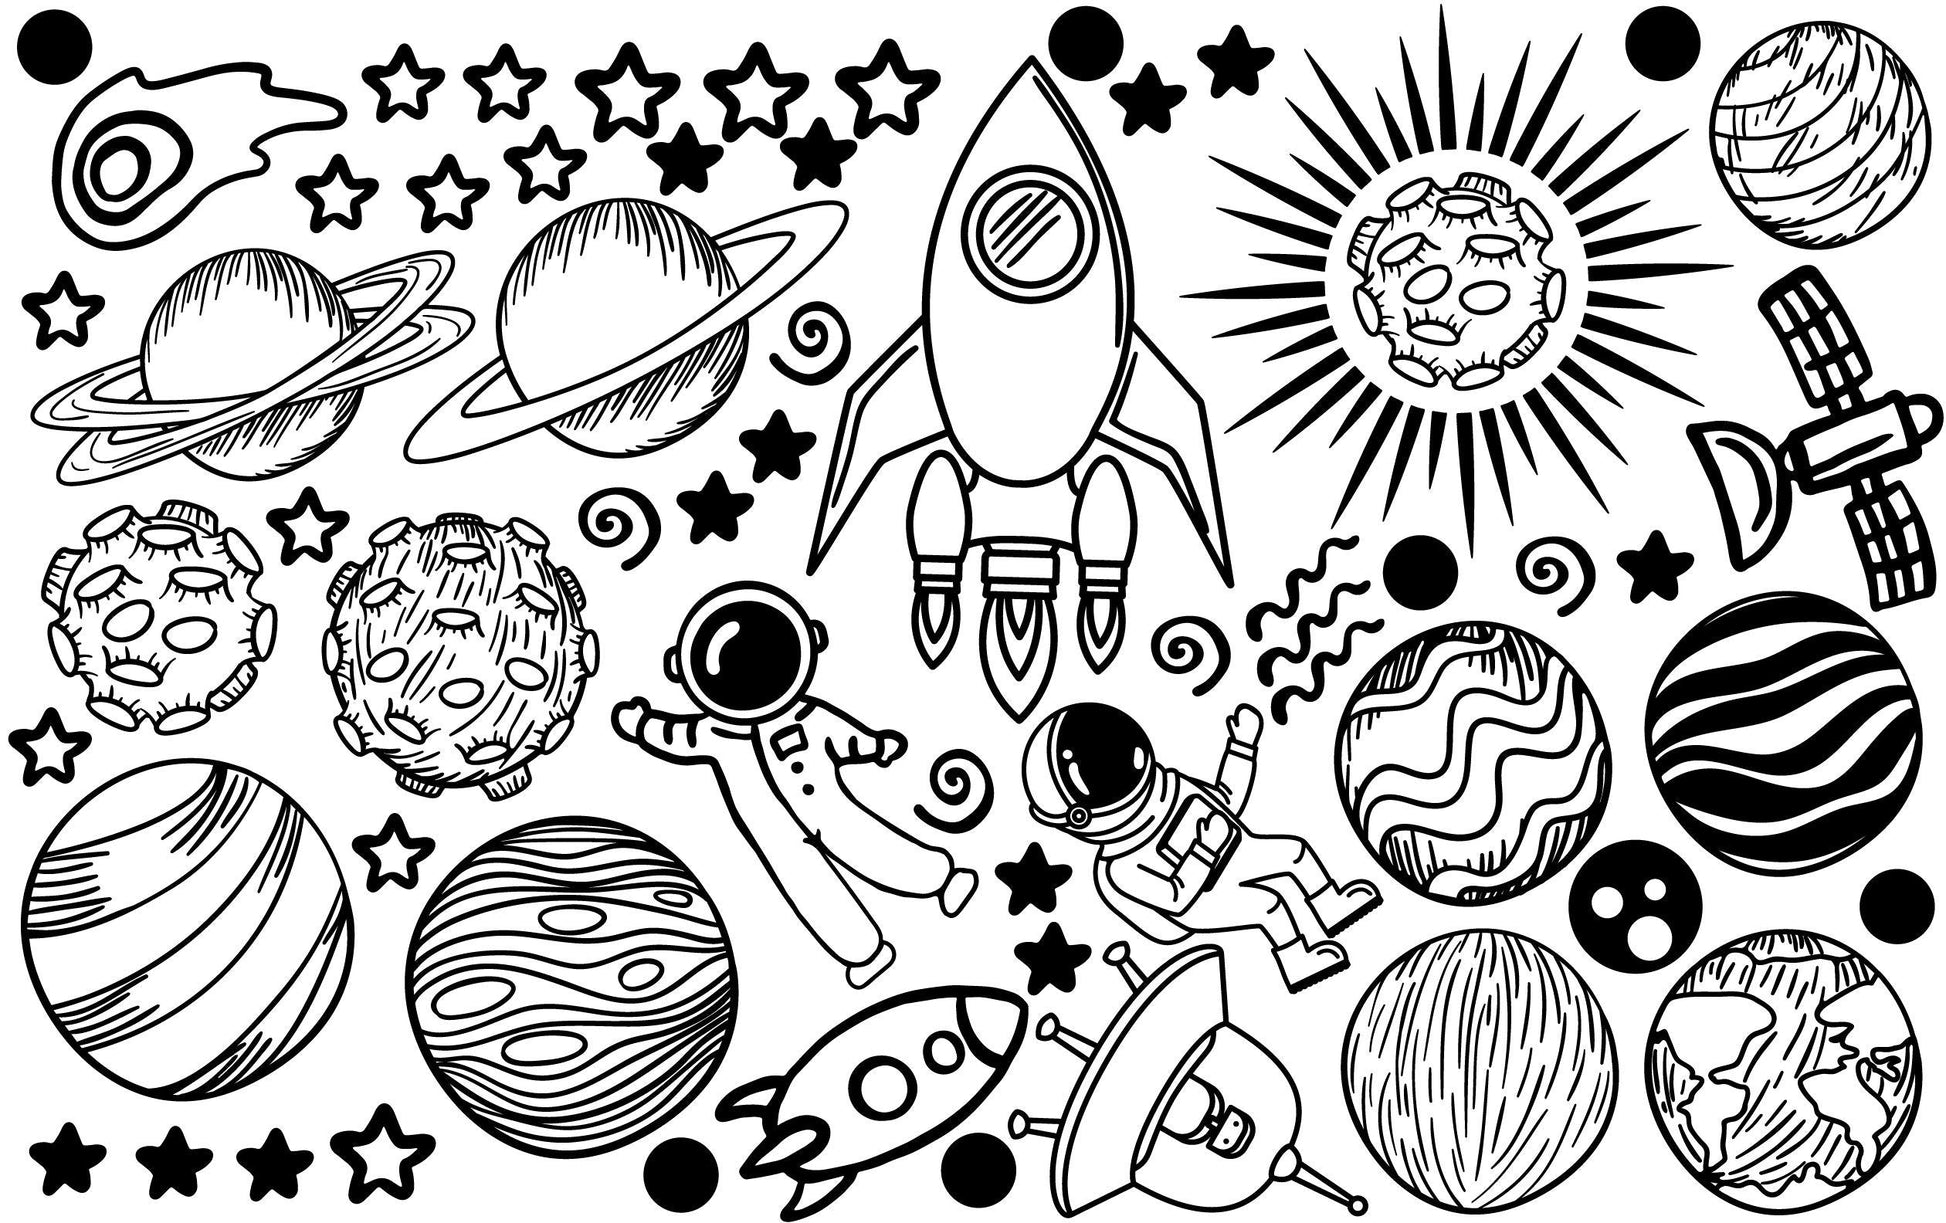 Outer Space Wall Decals Space Ship Stickers Solar System Astronaut Rocket Solar System Boys Girls Play Room nursery kids Stars Sun, LF478